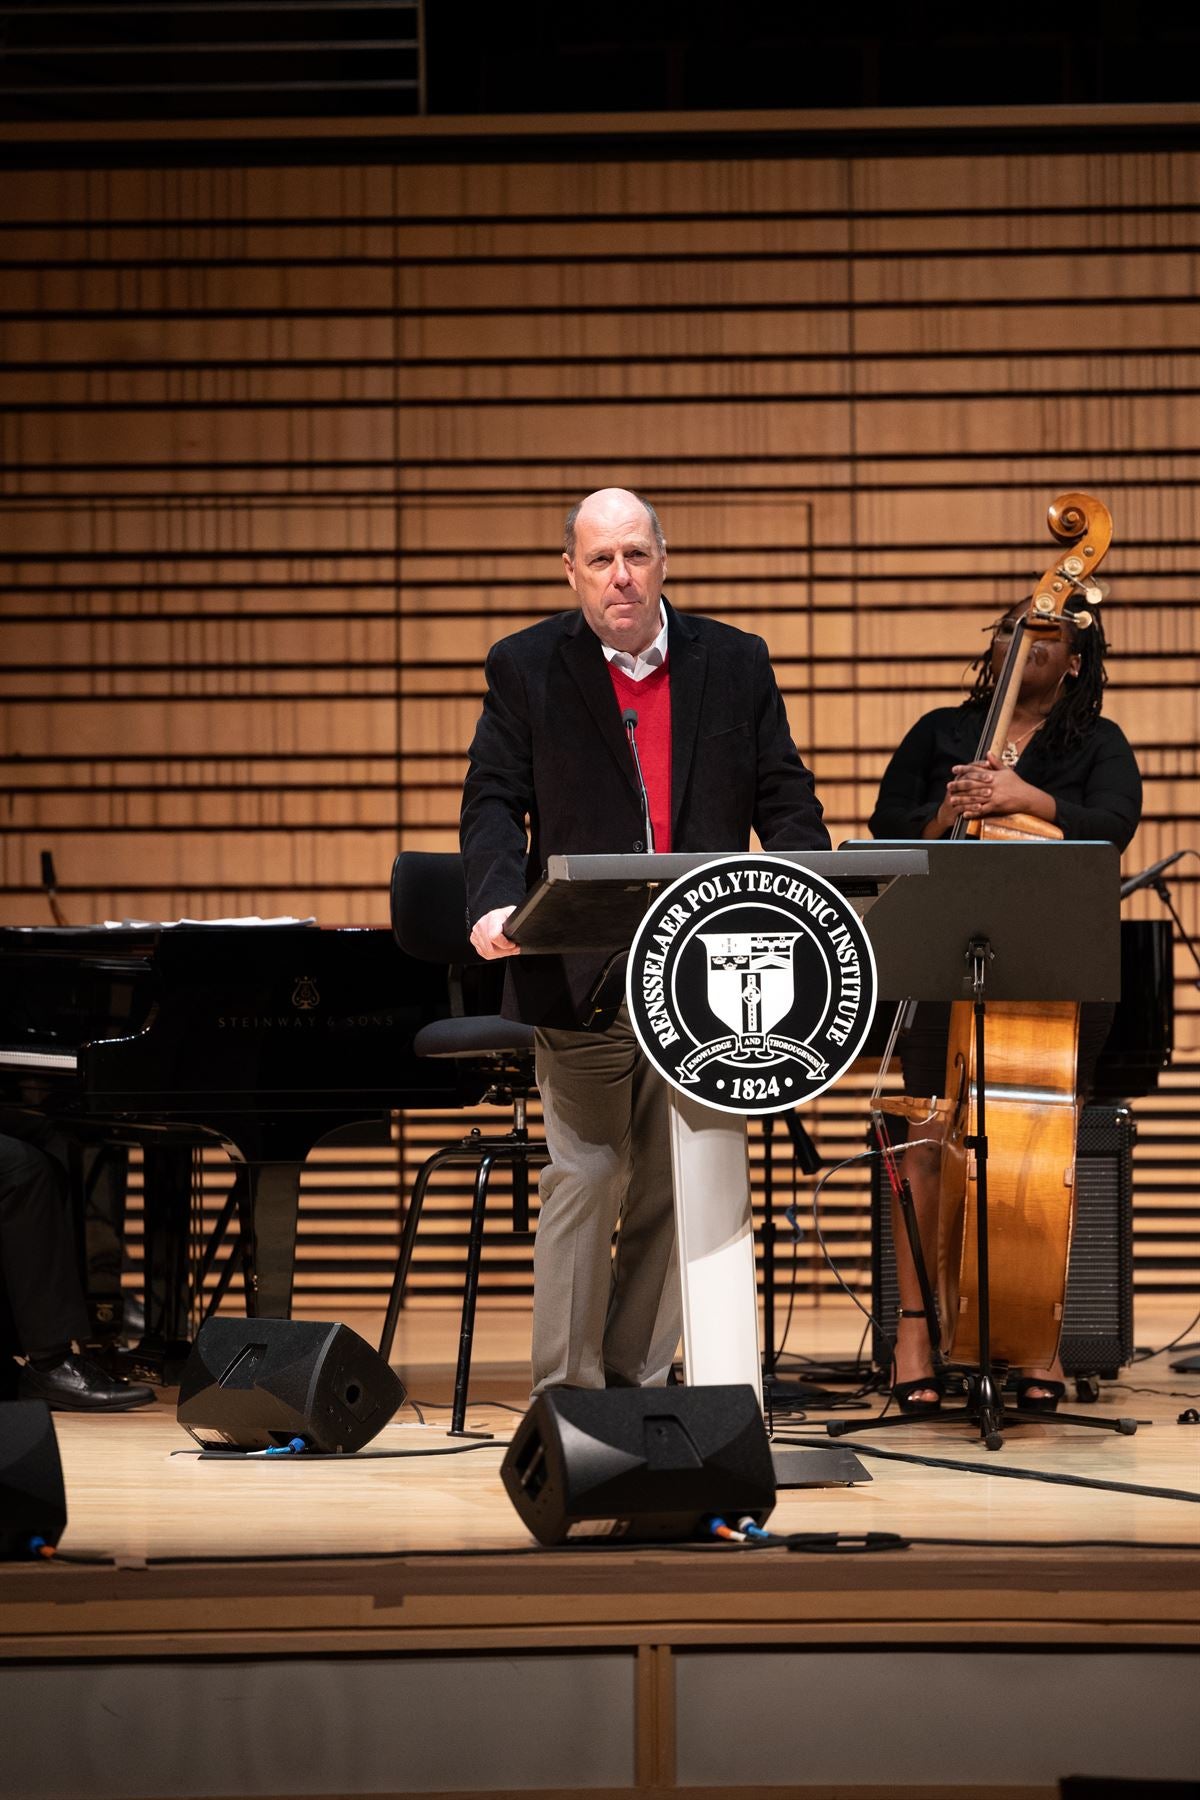 President Schmidt invited the audience at the Holiday Concert to reception following.